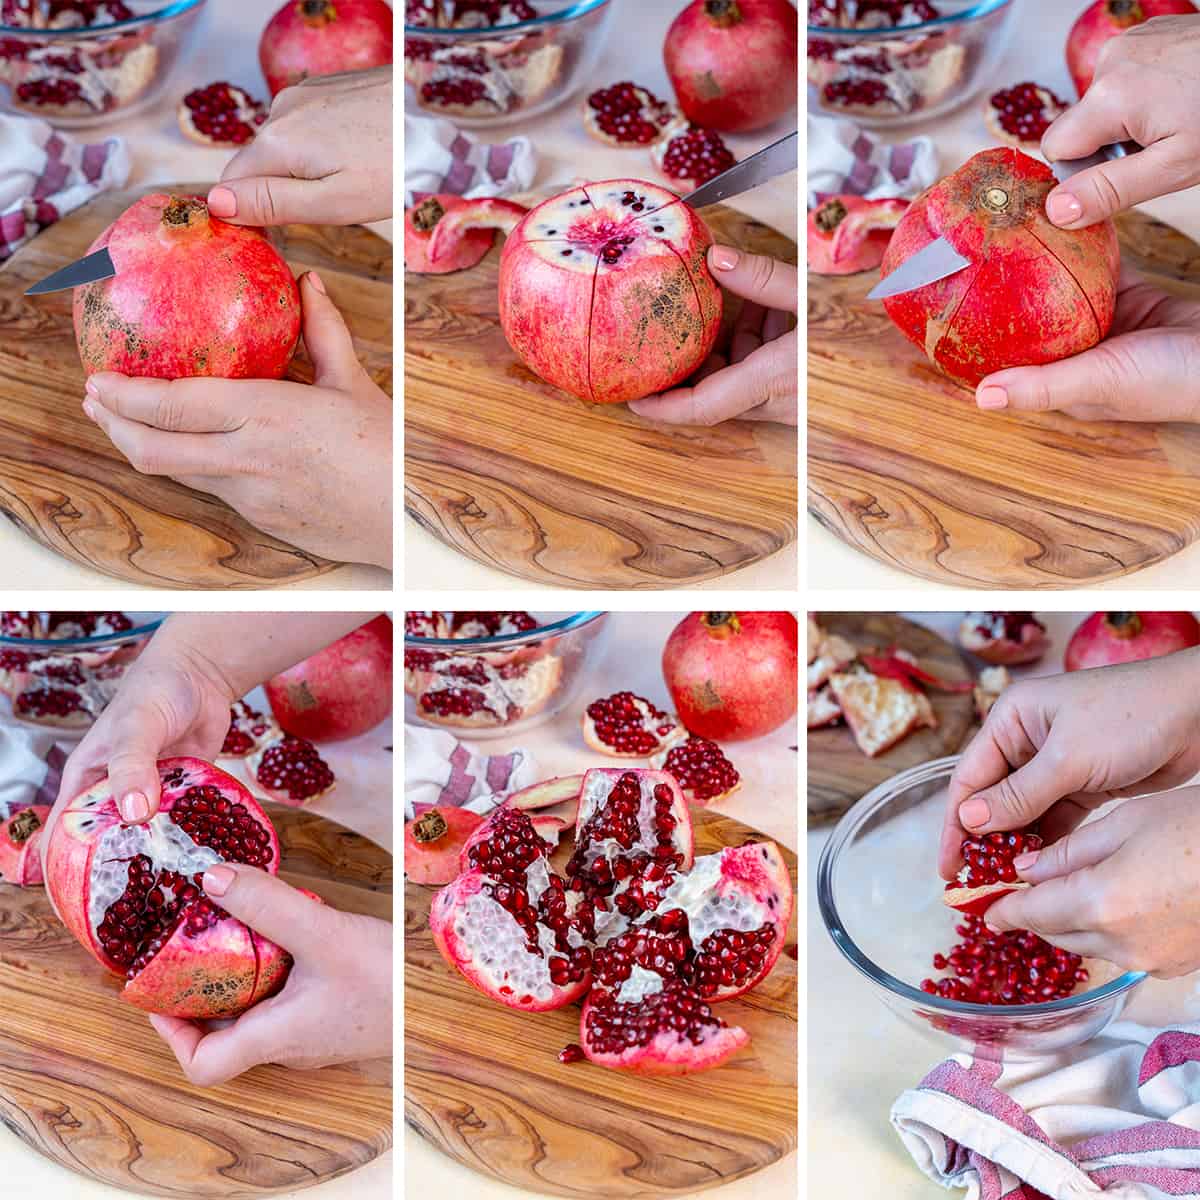 A collage of pictures showing how to cut a pomegranate into segments and then to remove the seeds out of them.